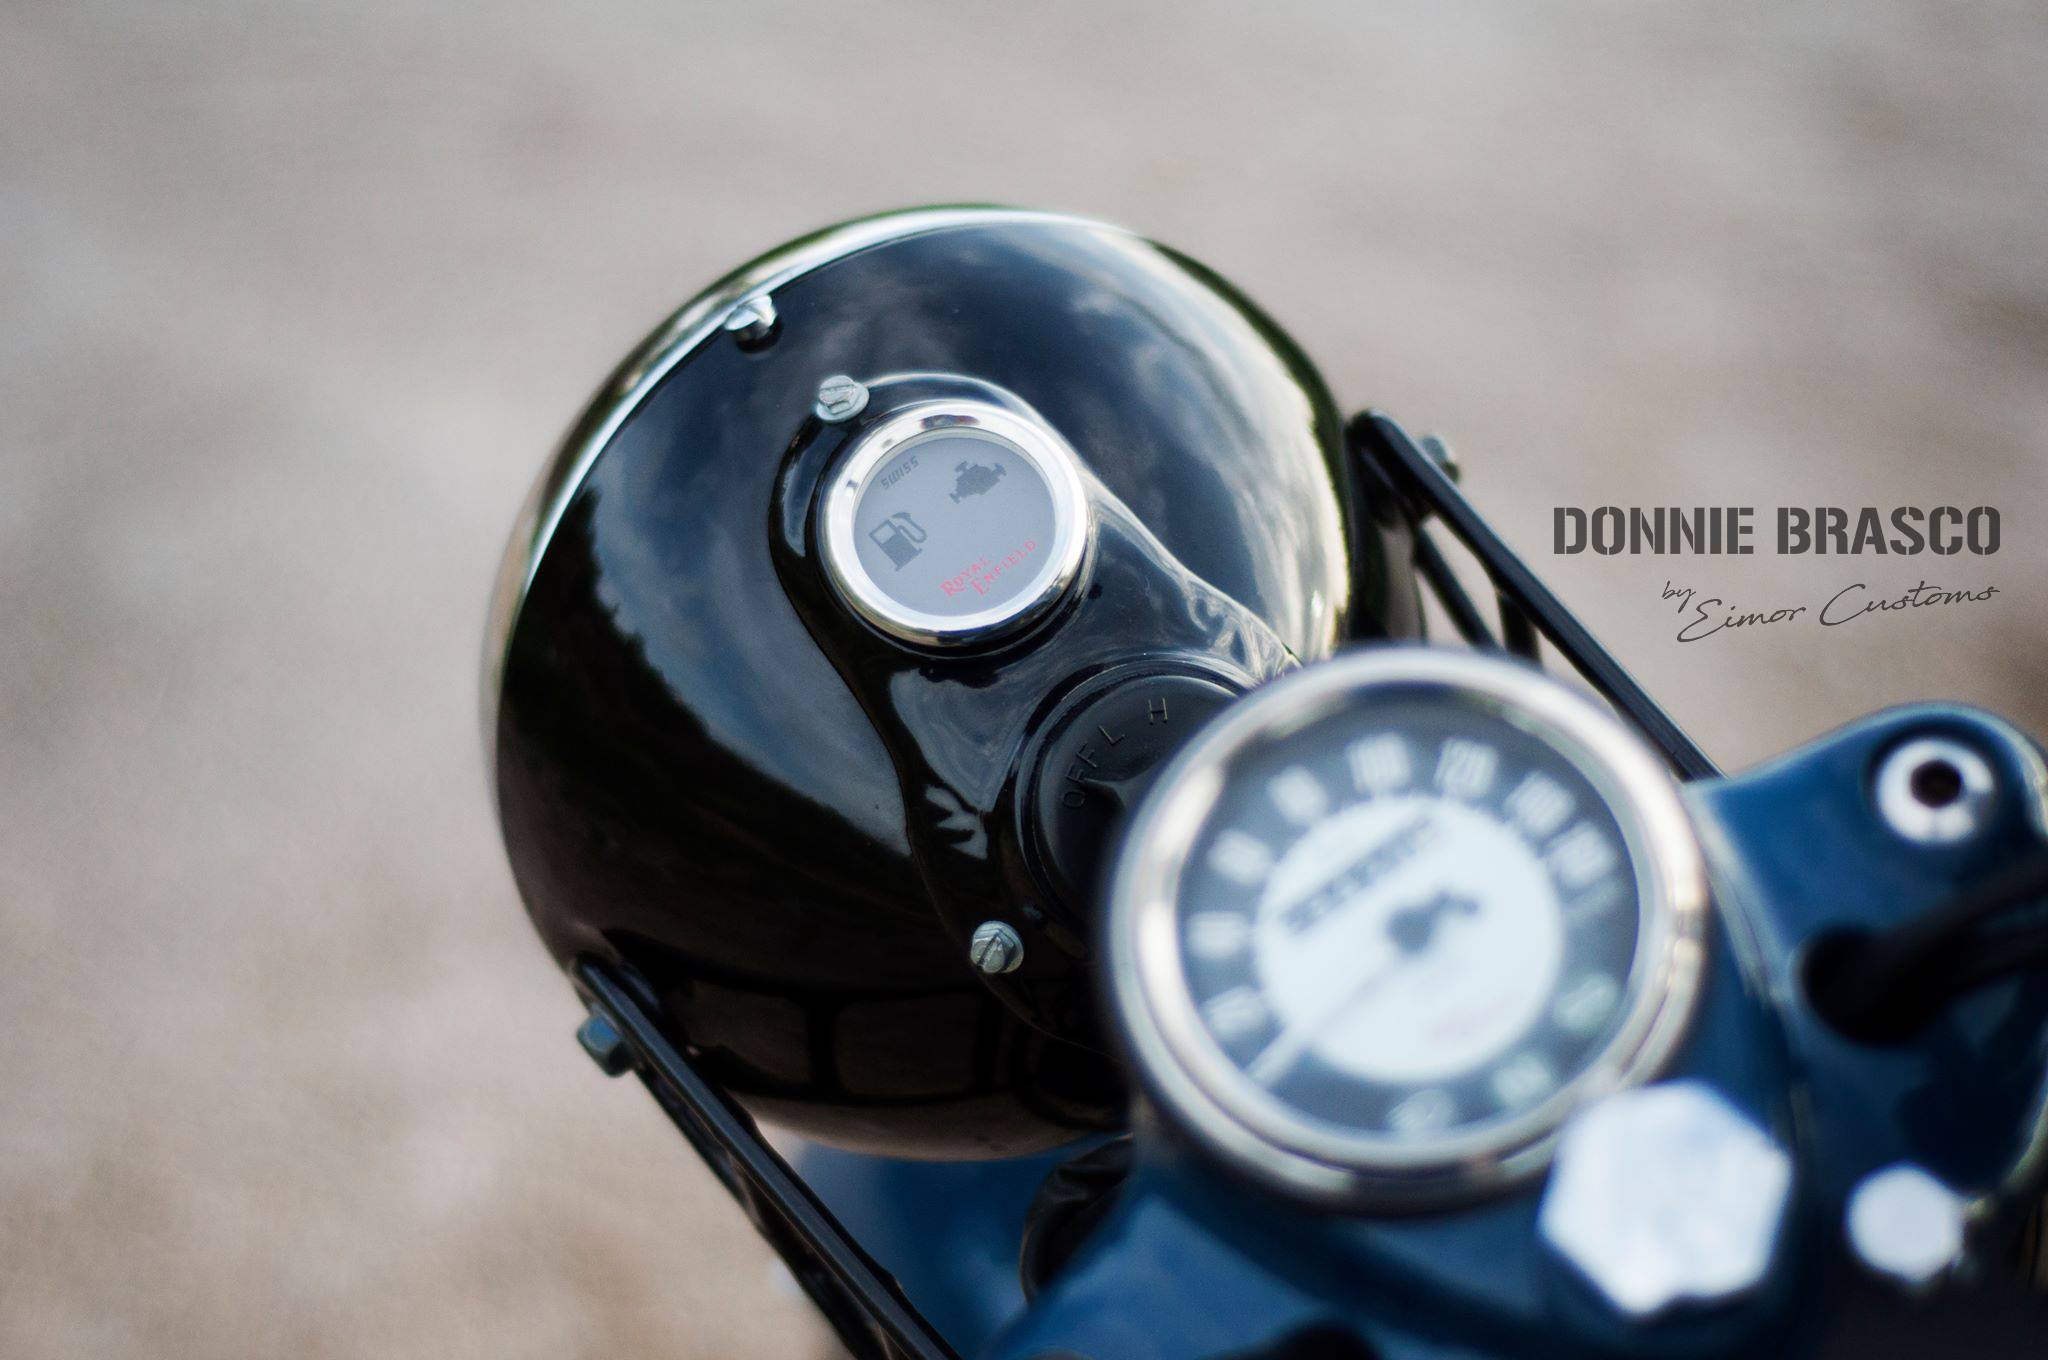 Royal Enfield Classic 'Donnie Brasco' Edition Details and Photos - midground